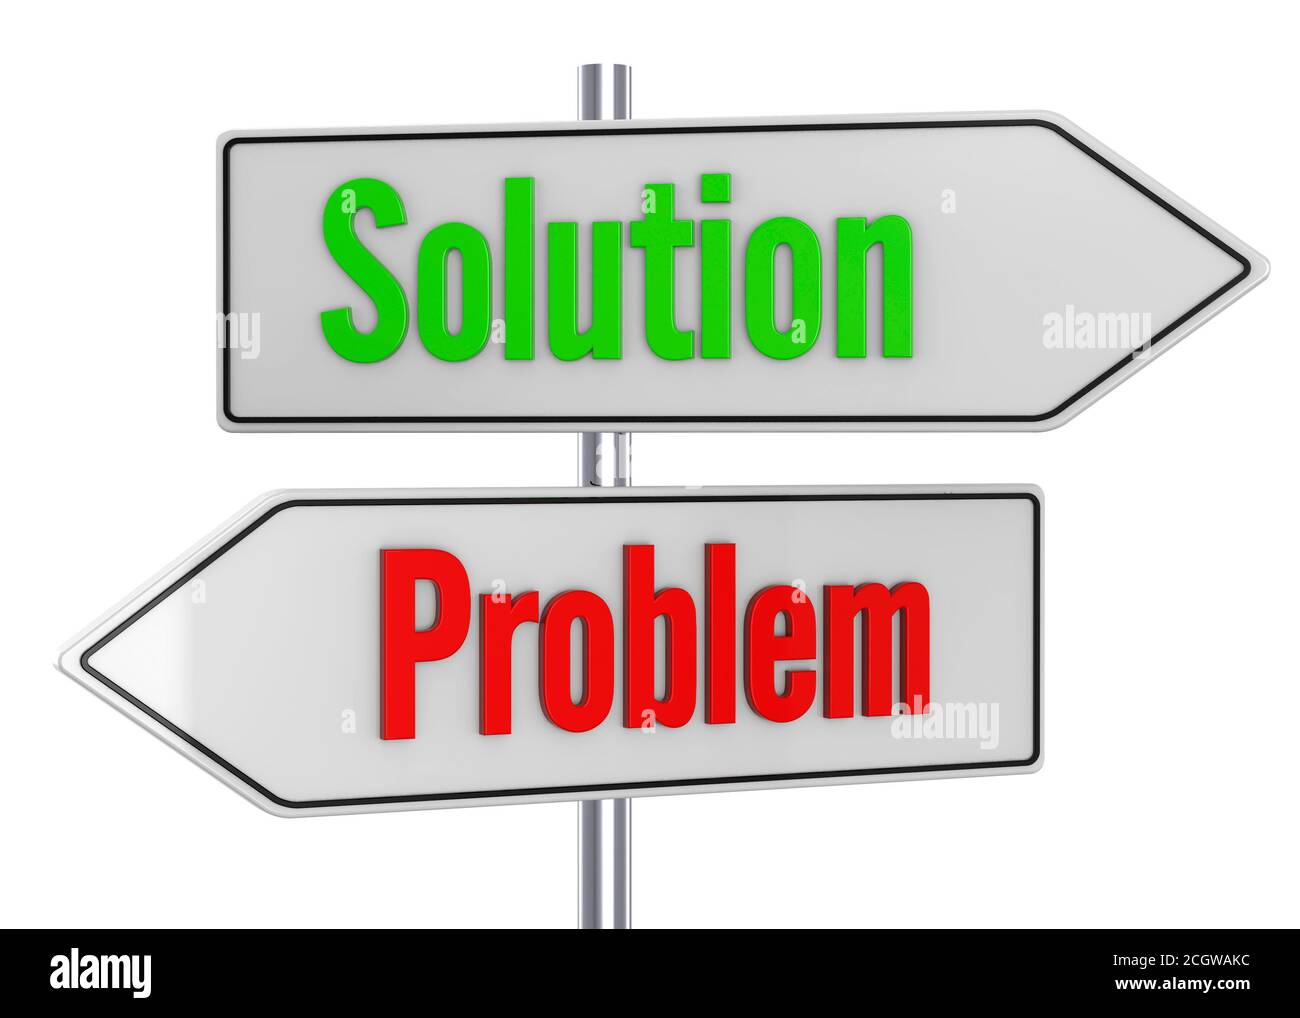 Problem and Solution Concept - 3D Stock Photo